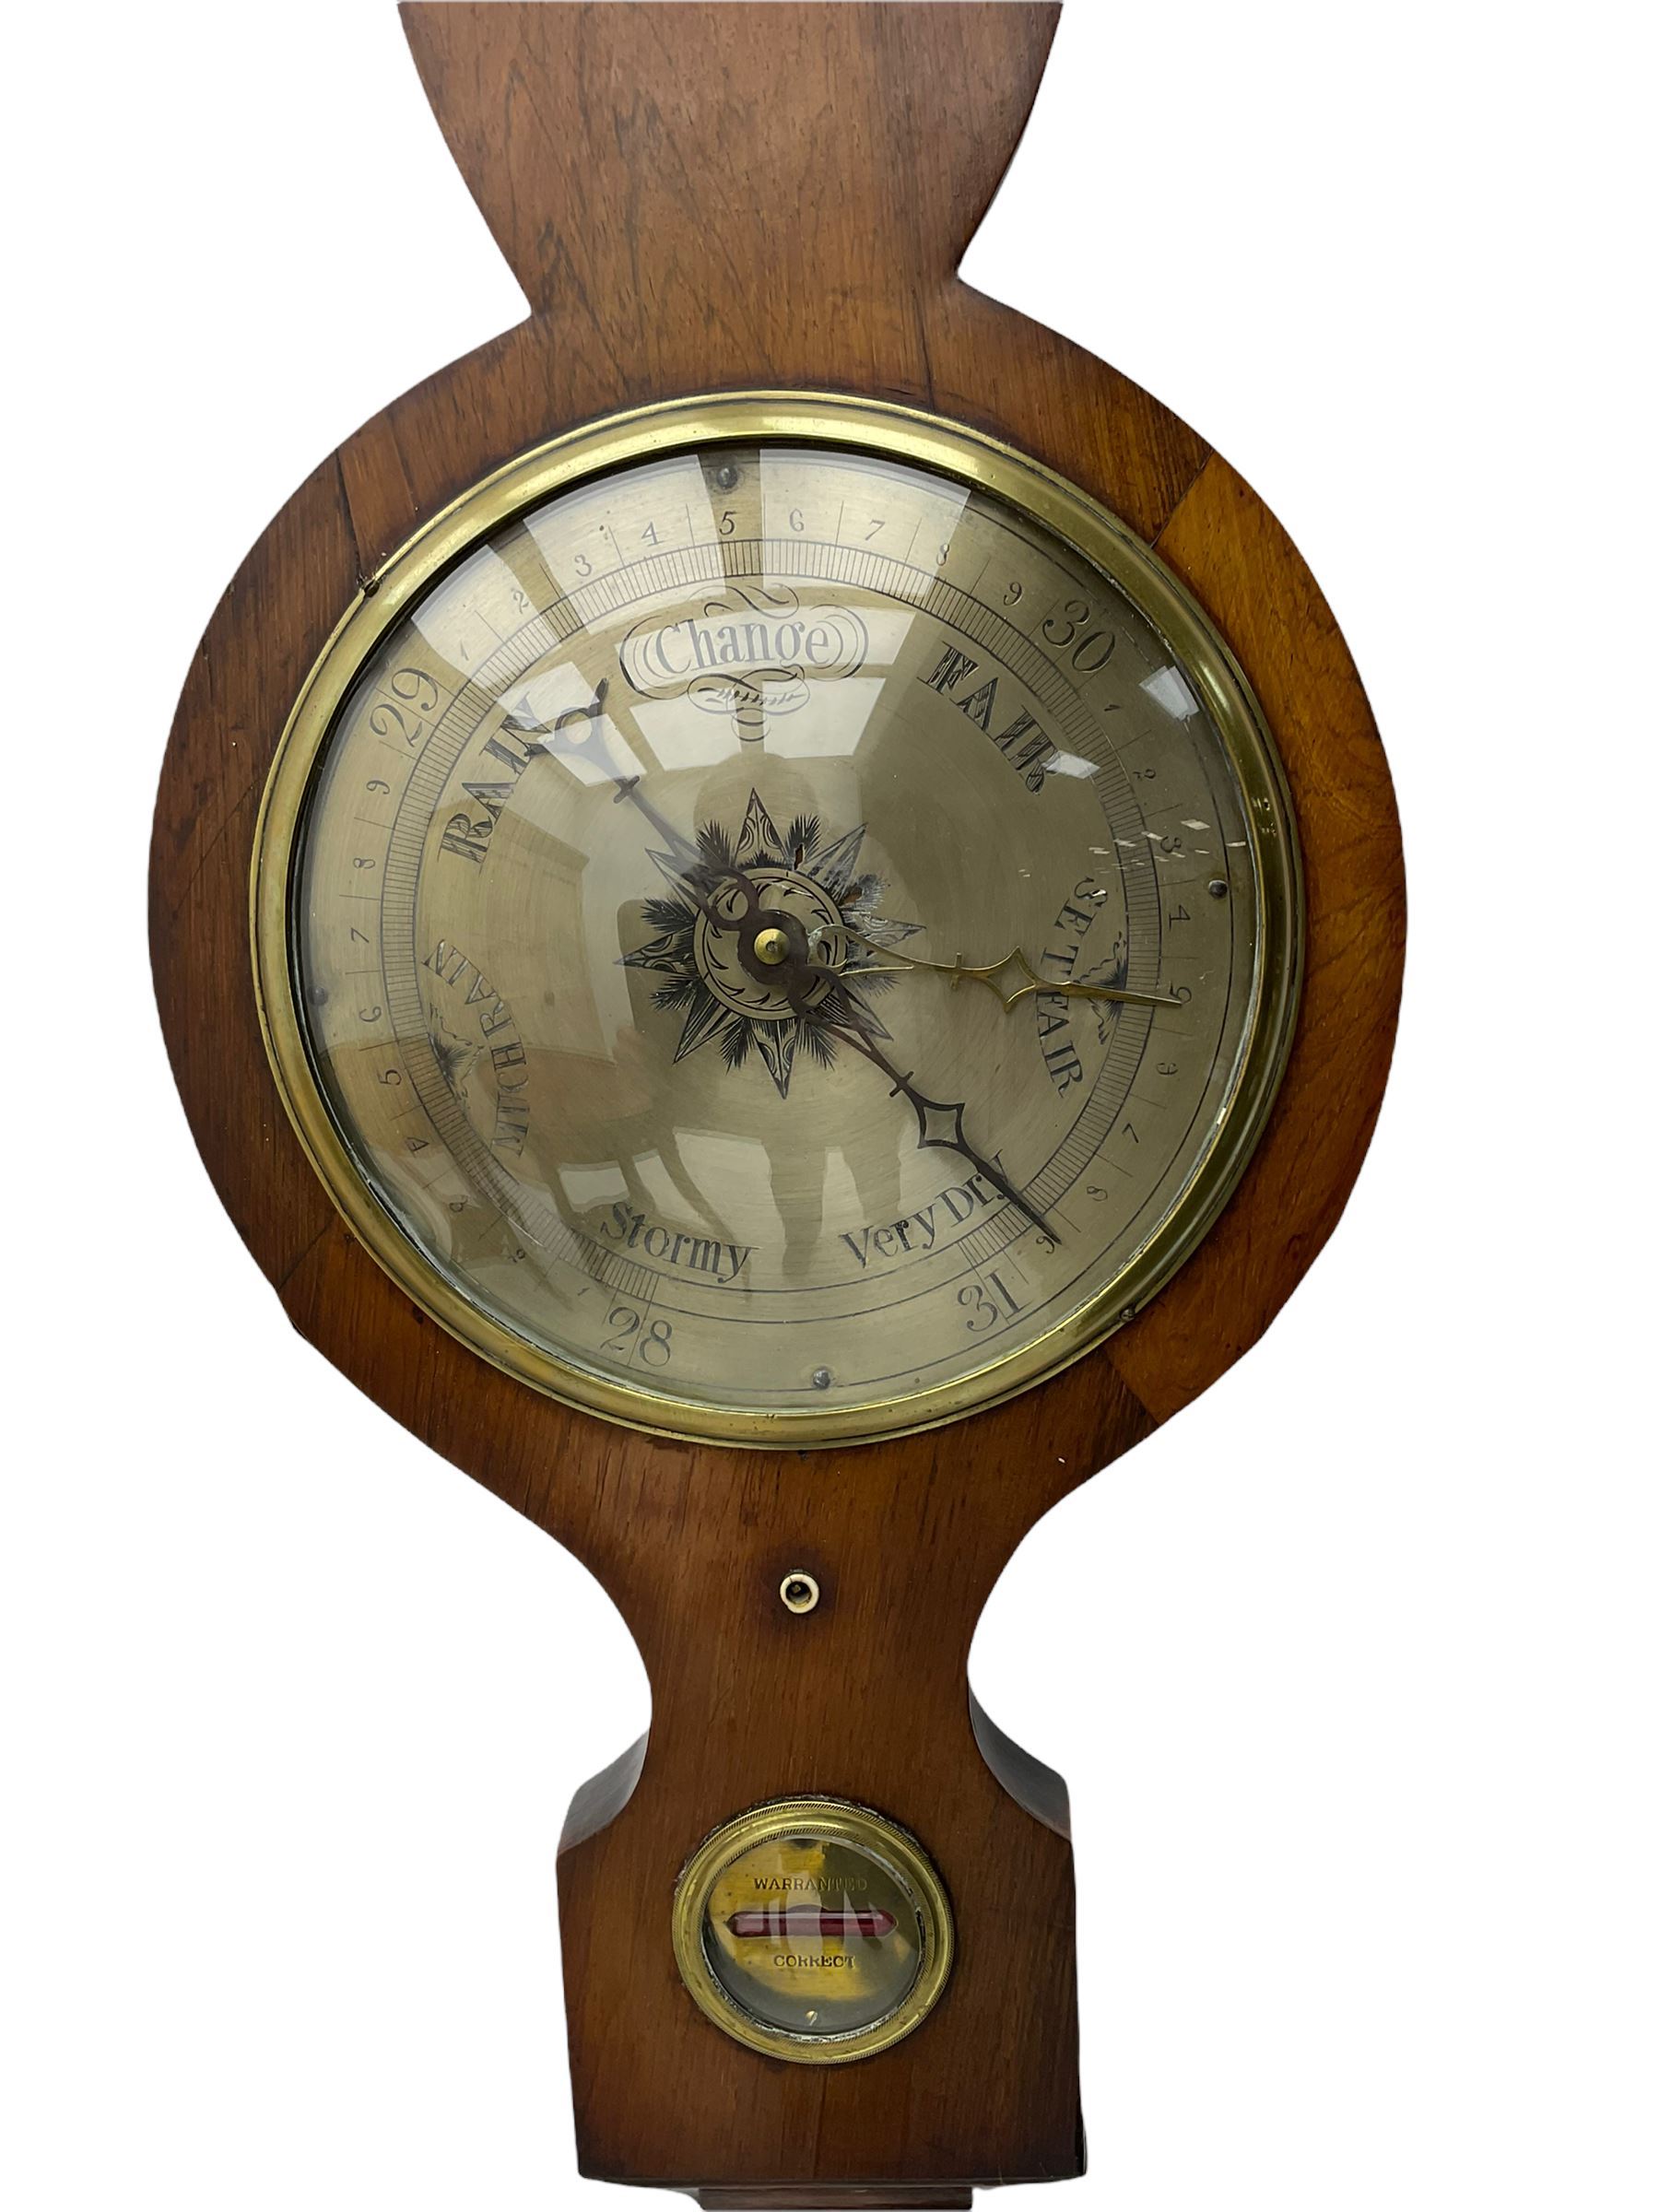 A 19th century four instrument mercury wheel barometer in a mahogany case with a swans neck pediment - Image 3 of 4